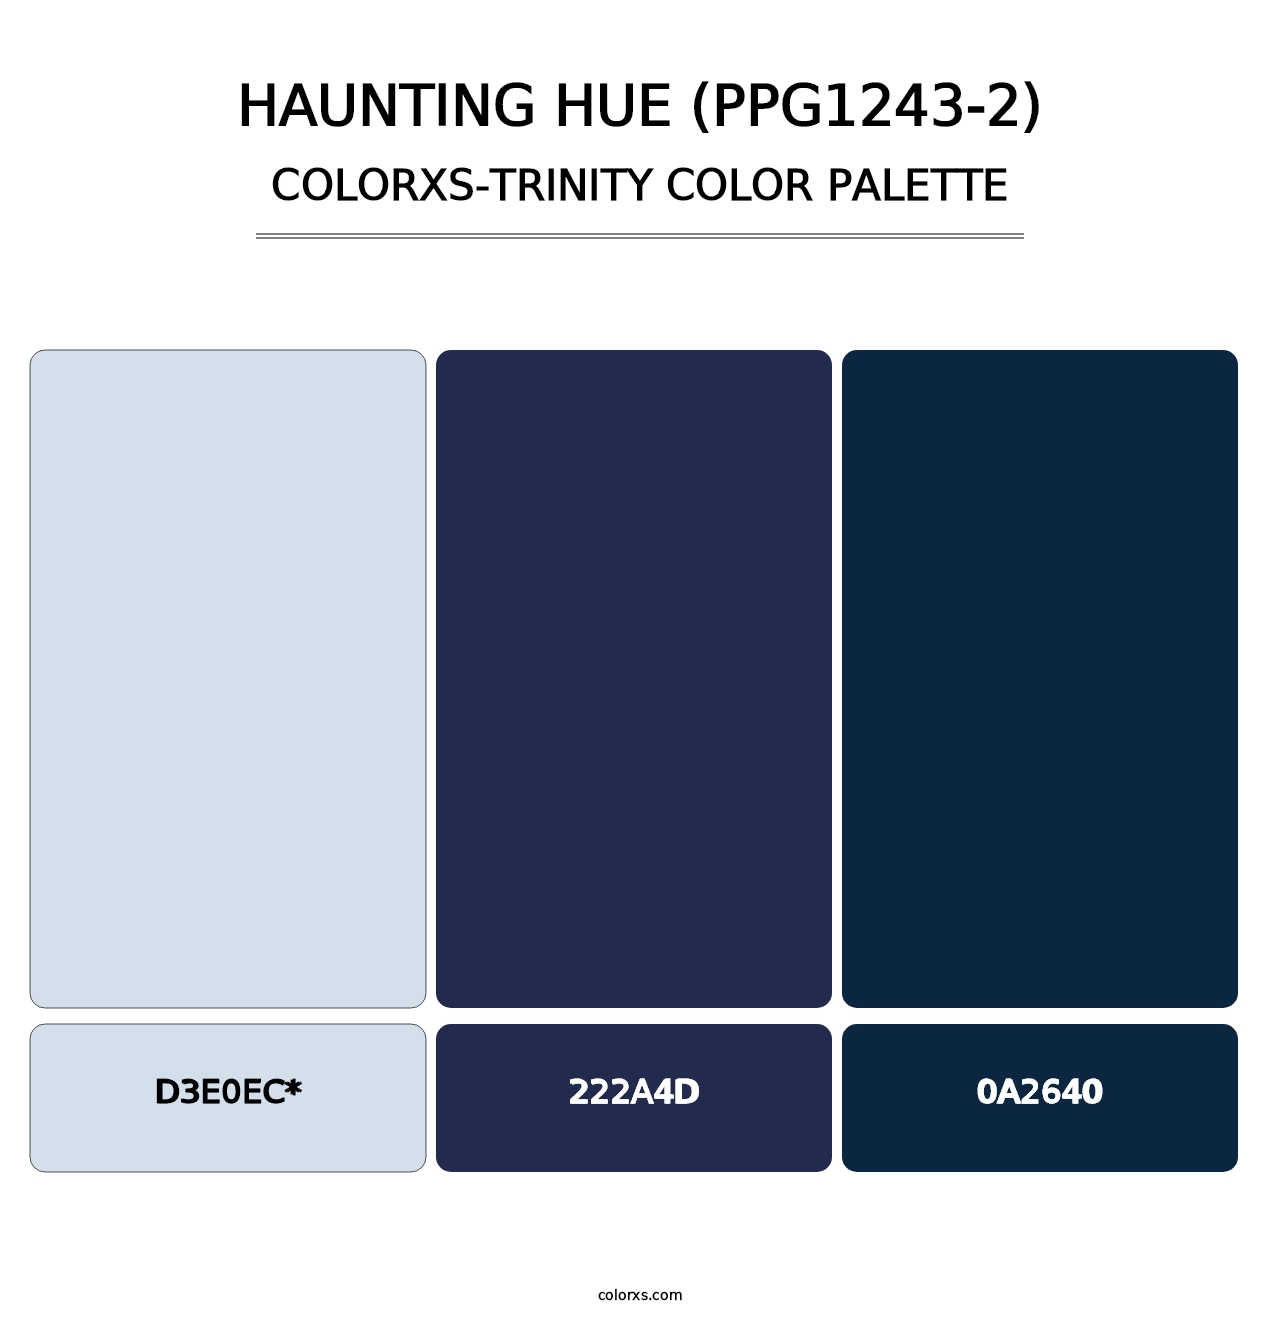 Haunting Hue (PPG1243-2) - Colorxs Trinity Palette